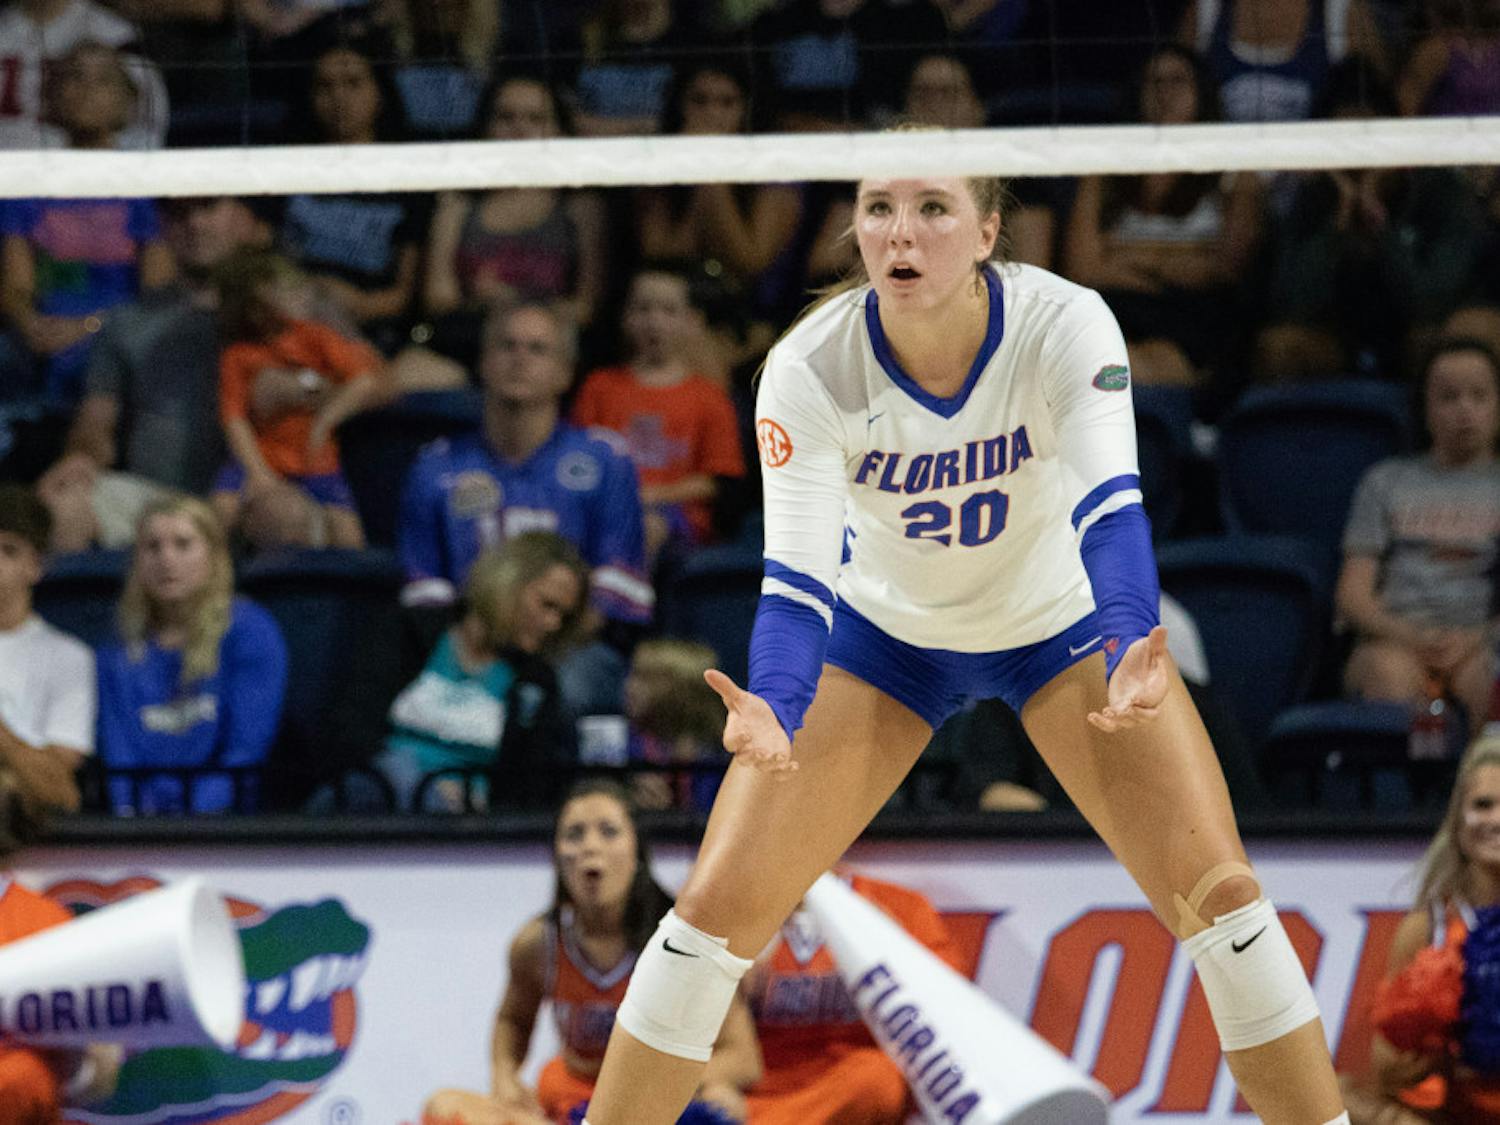 Outside hitter Thayer Hall posted a team-high 12 kills against Florida State to help the No. 11 Gators to a 3-1 win in Tallahassee Wednesday night. 